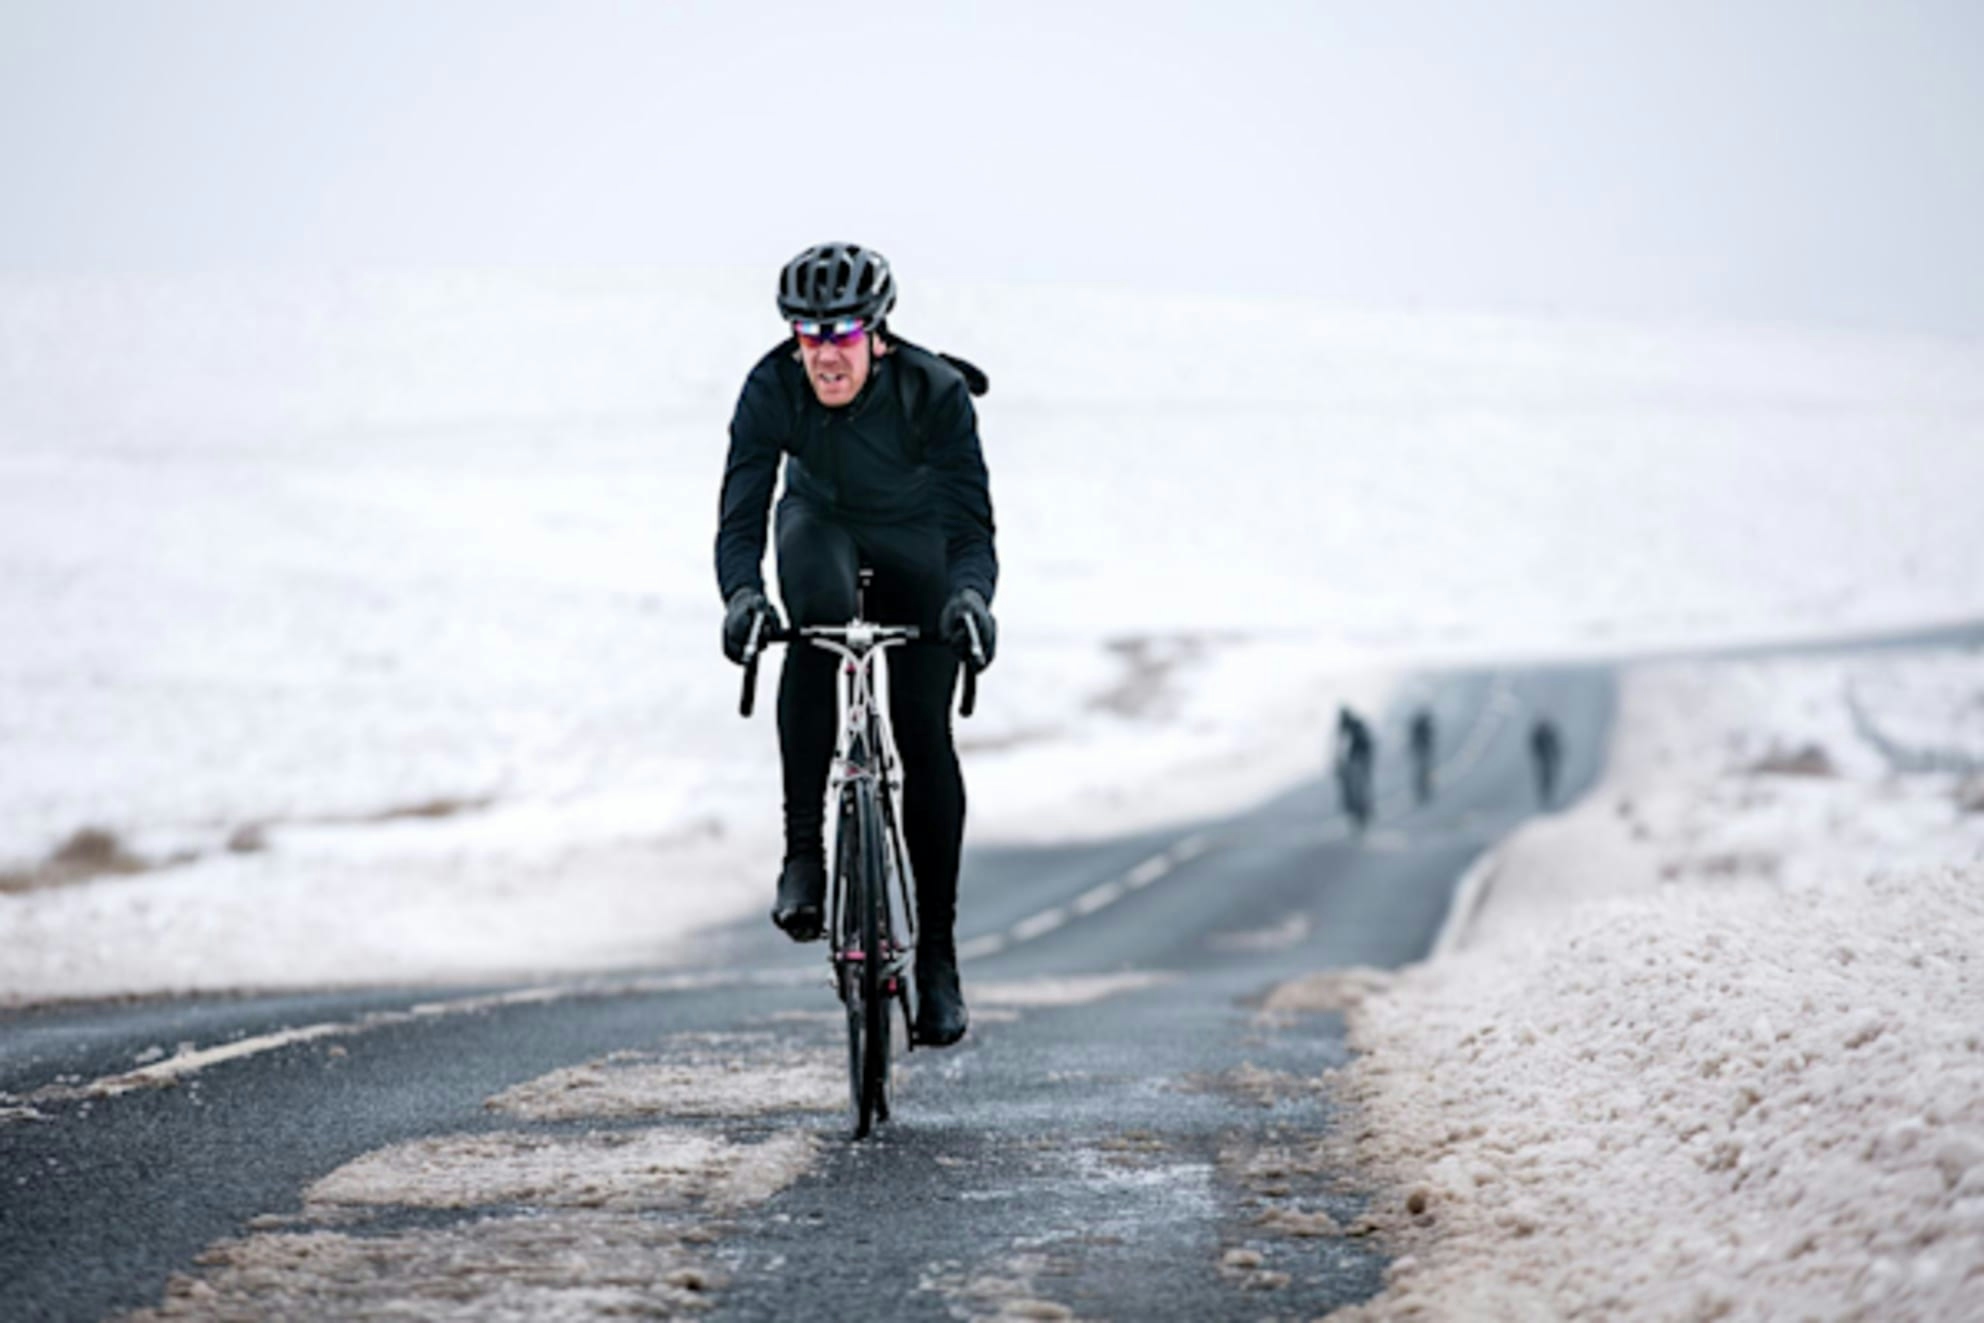 The #Festive500: A Challenge By Half